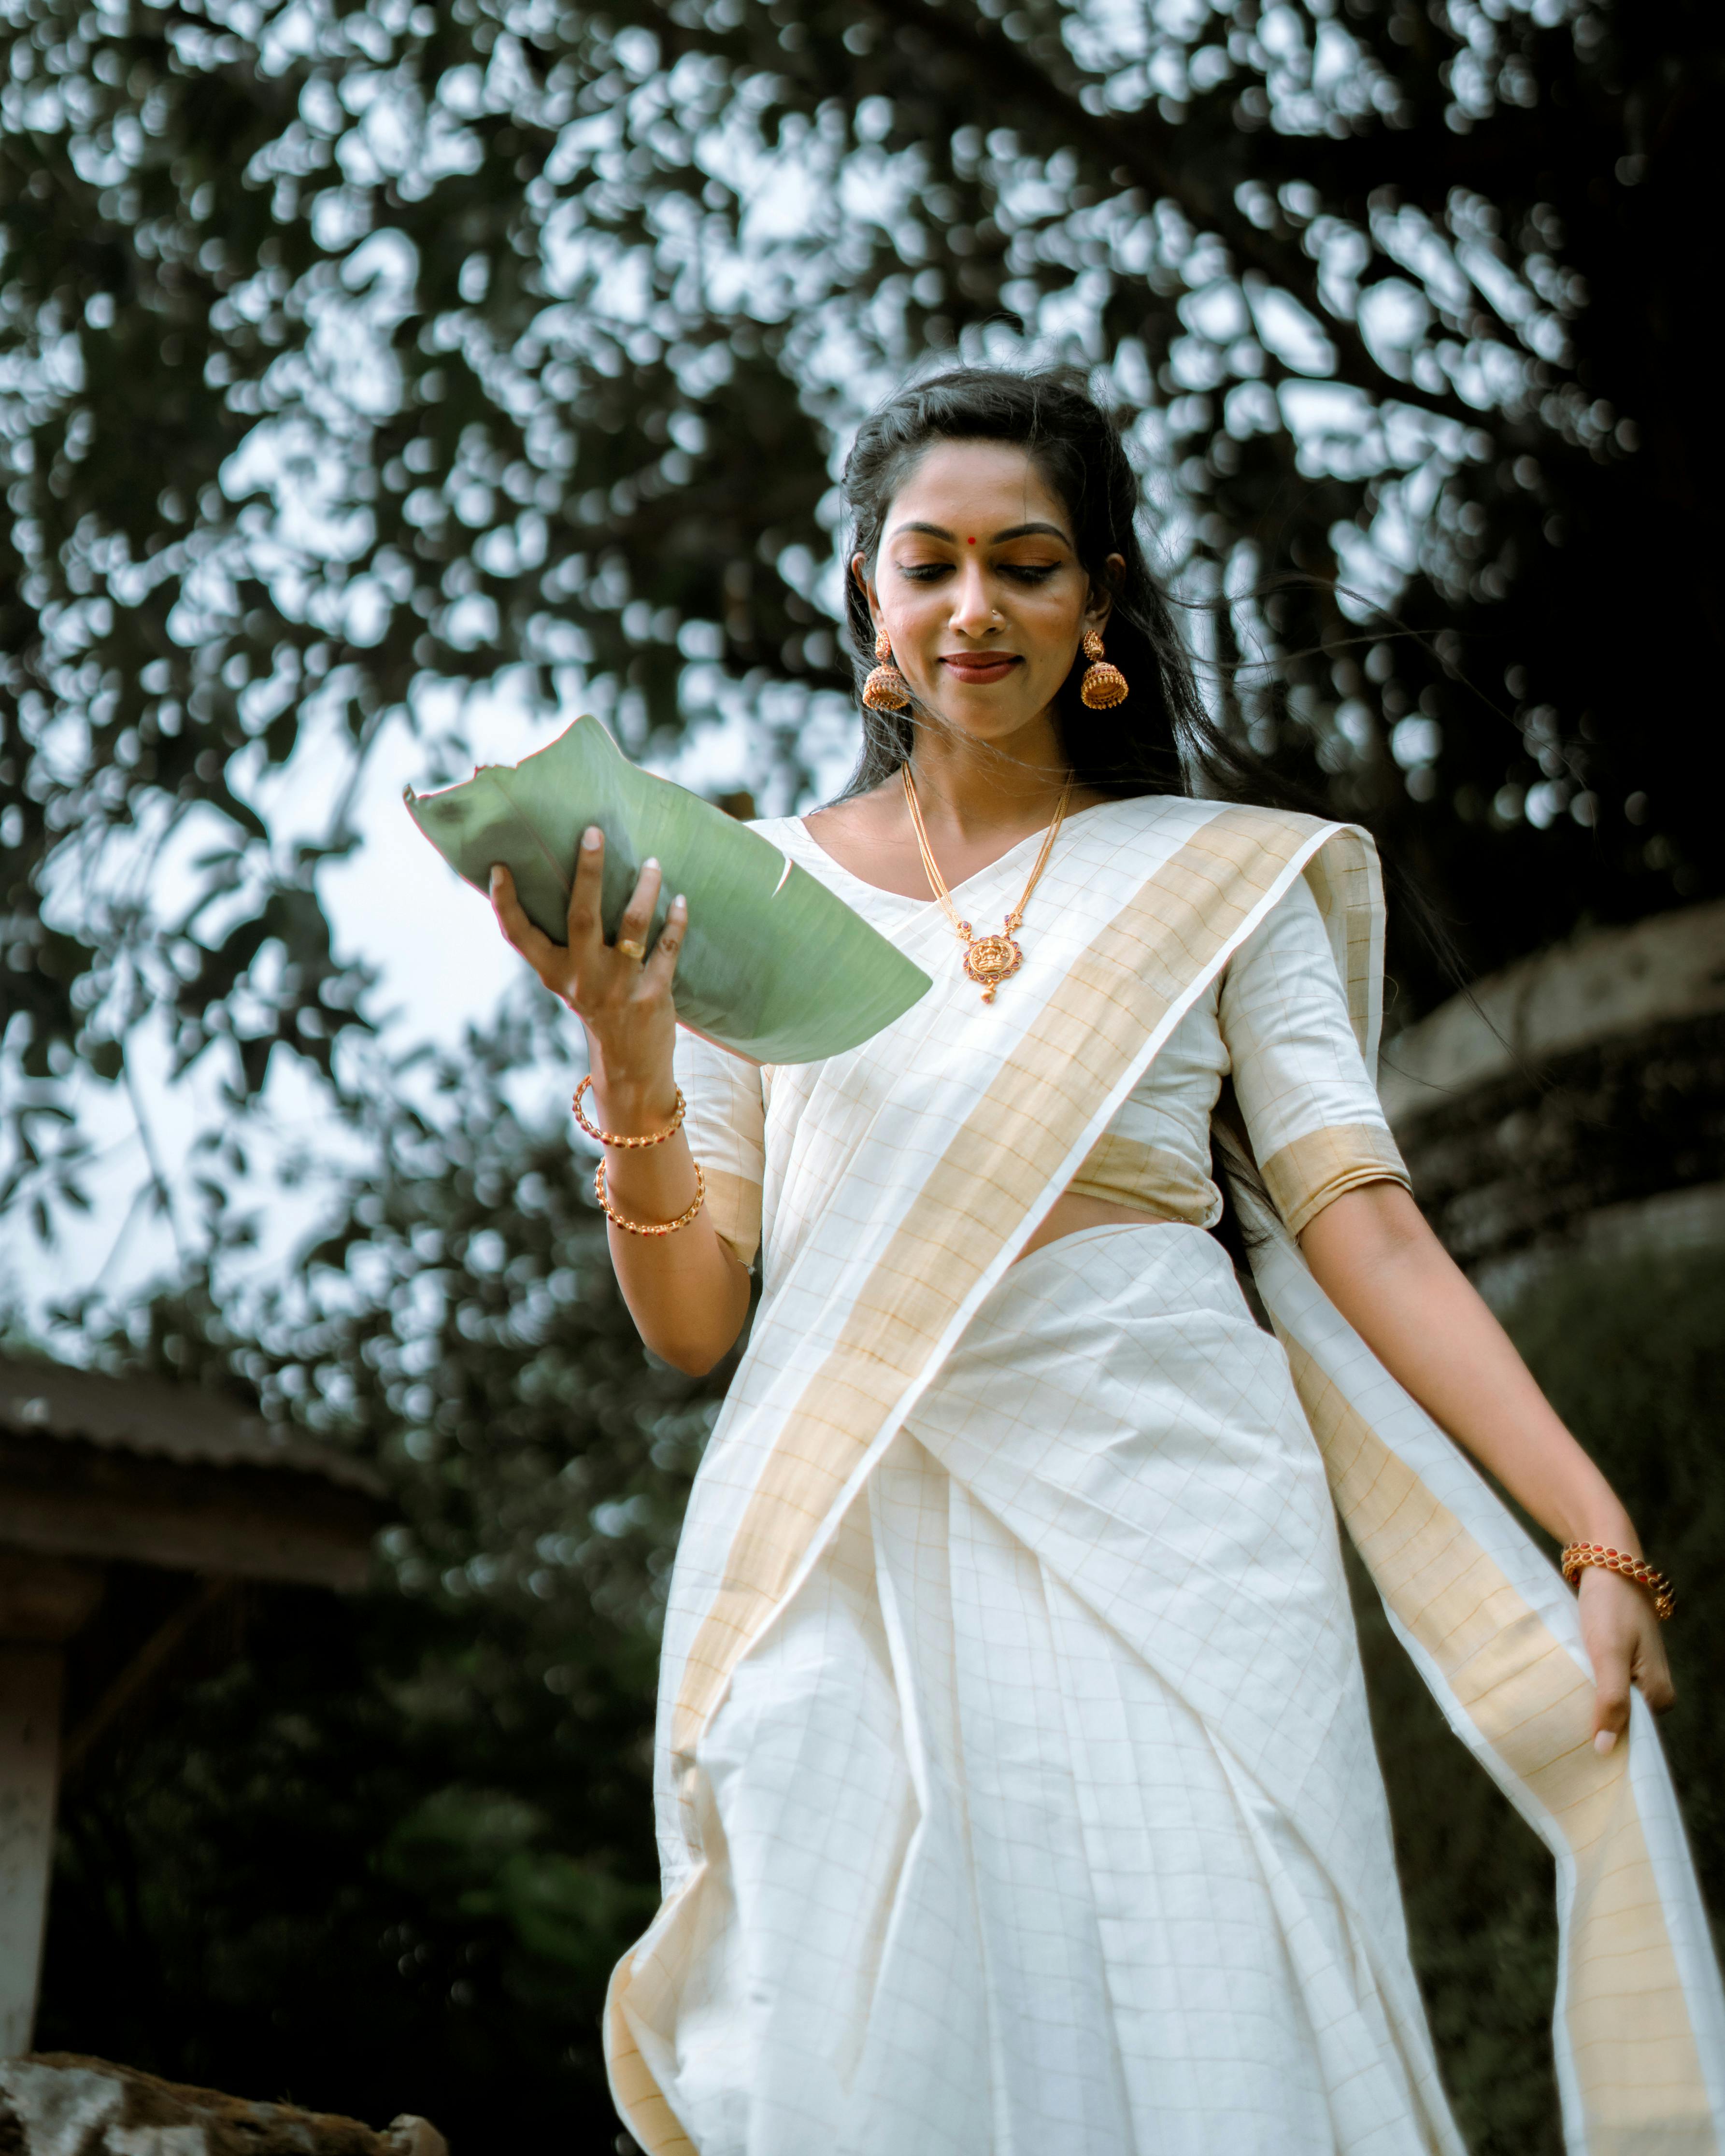 Rithu Manthra looks ethereal in a Kerala saree​ | Times of India